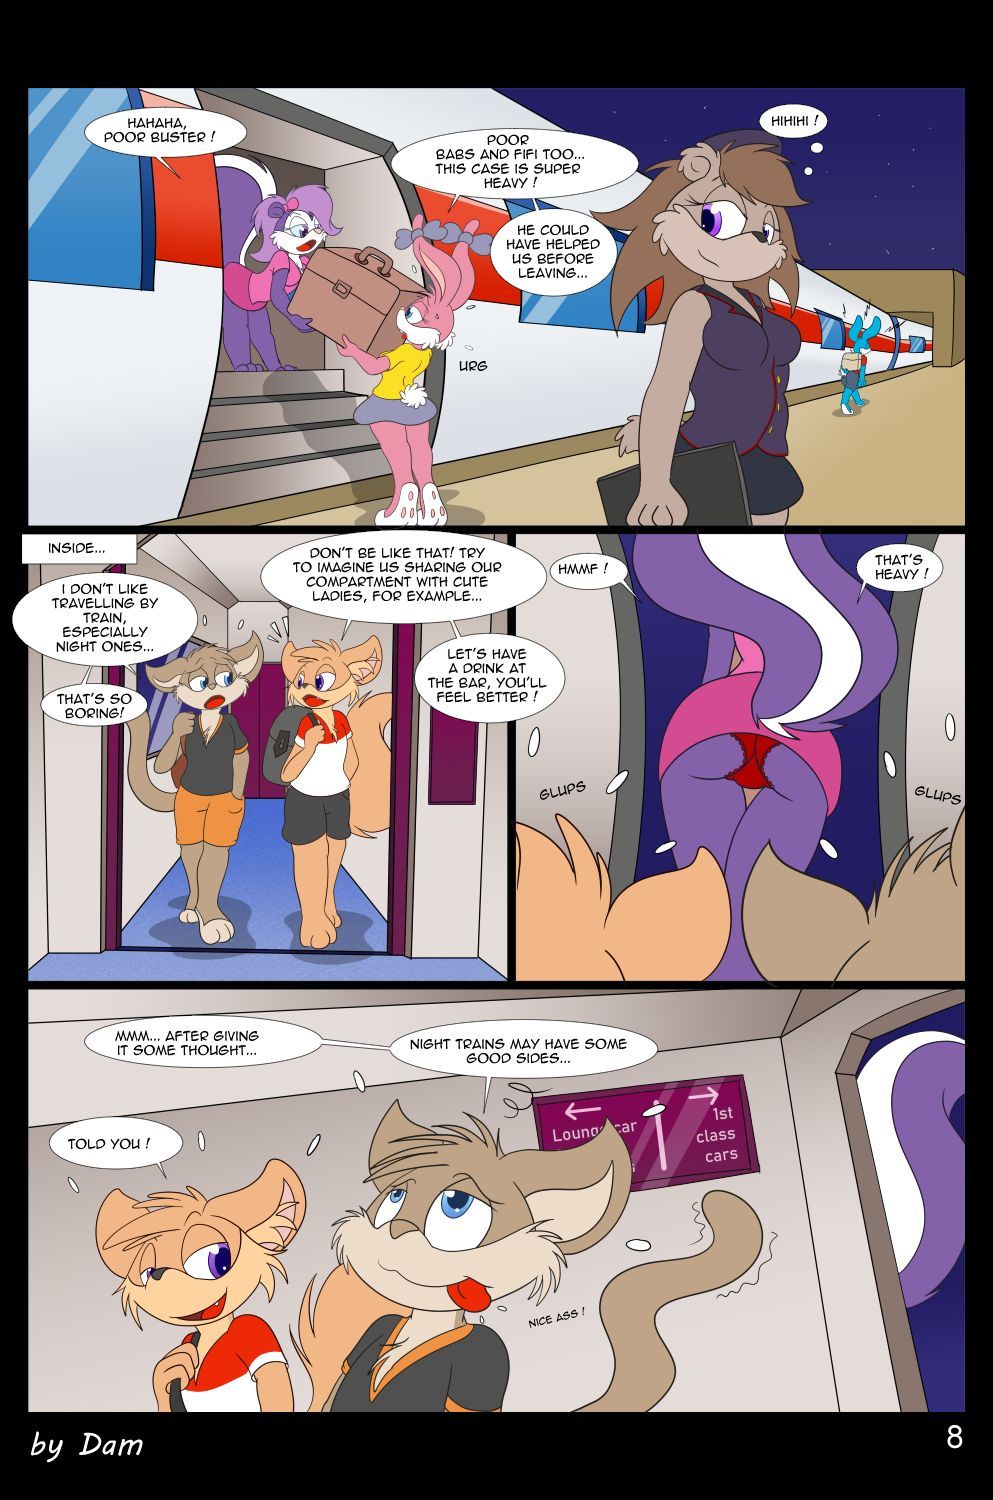 [Dam] Toons on a train [Ongoing] 8